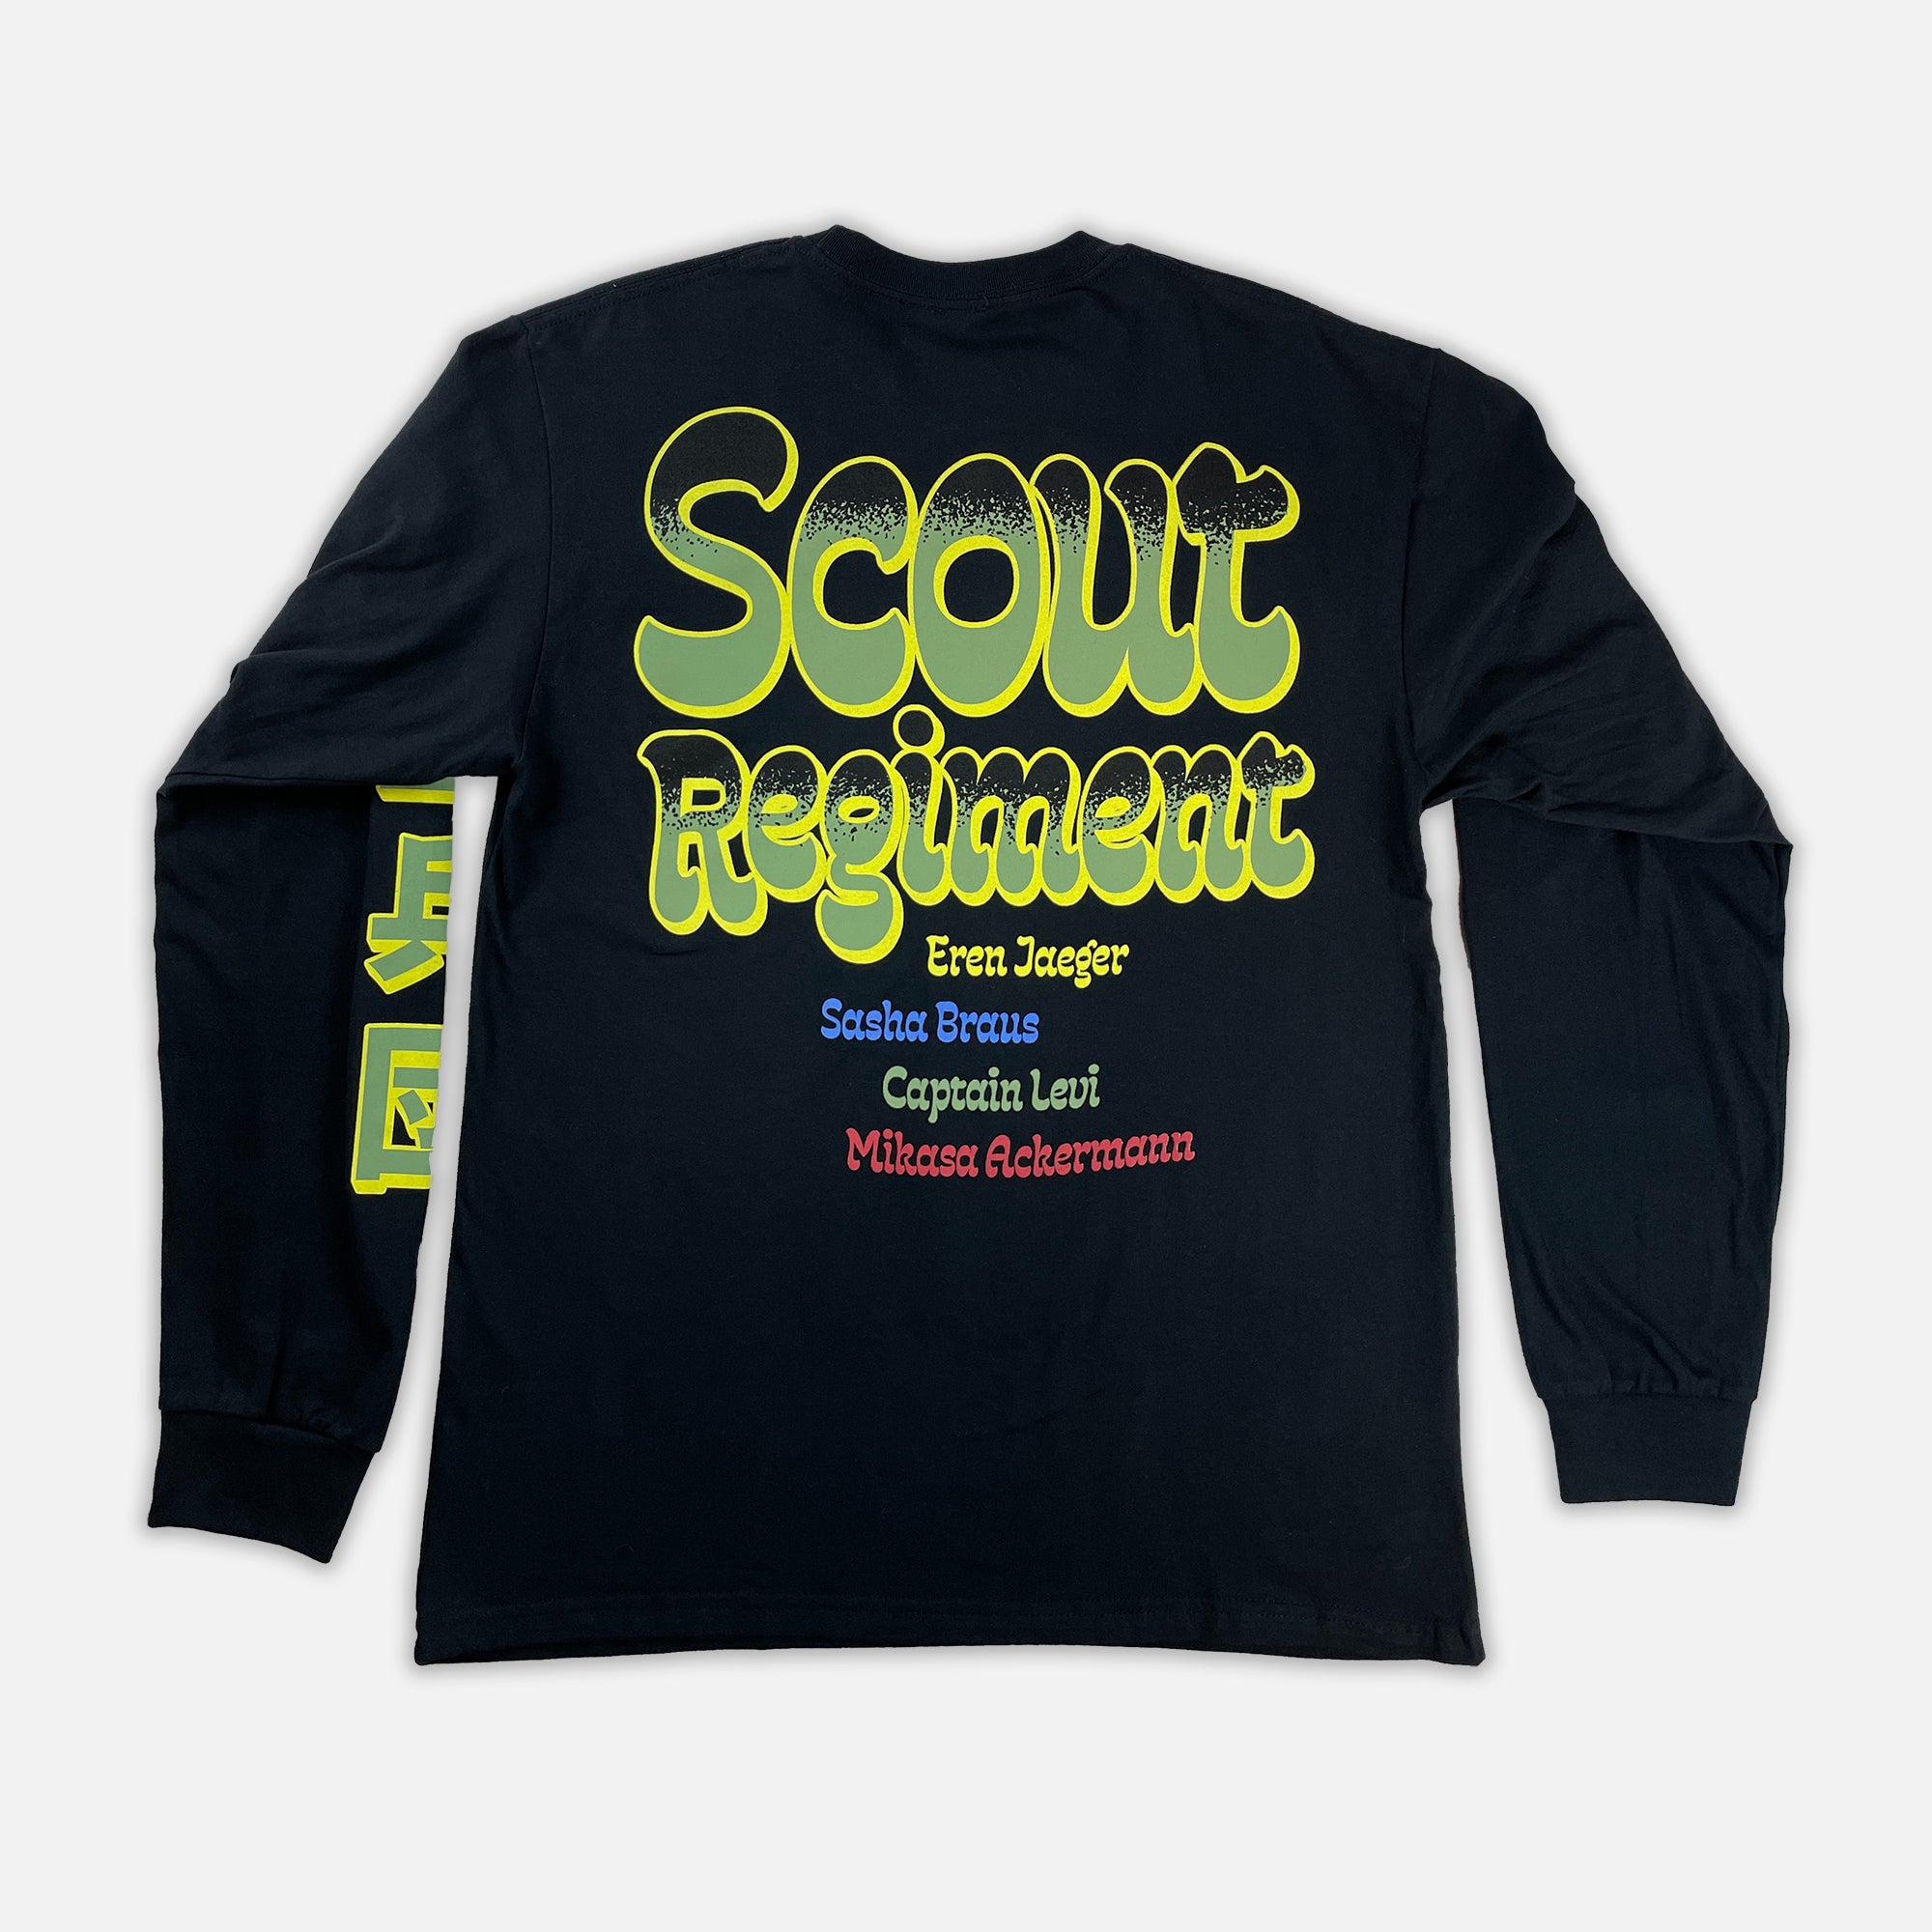 Attack on Titan - Scout Regiment Names Long Sleeve - Crunchyroll Exclusive! image count 1